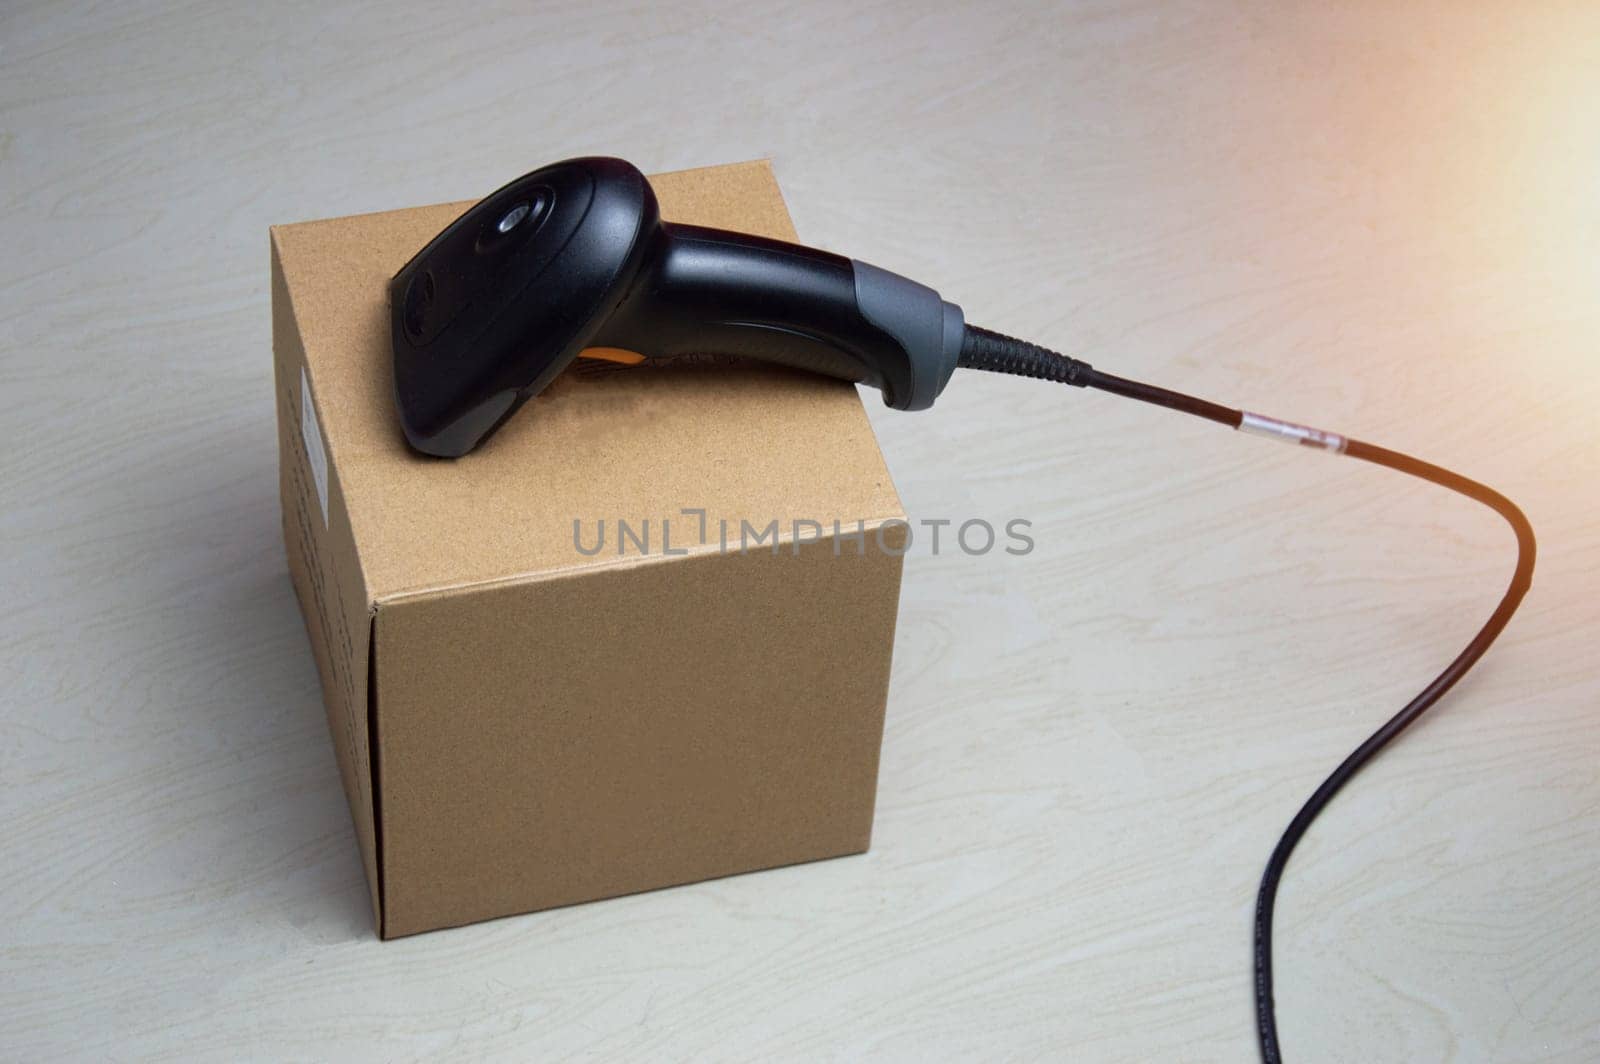 A barcode scanner is placed on a brown box.